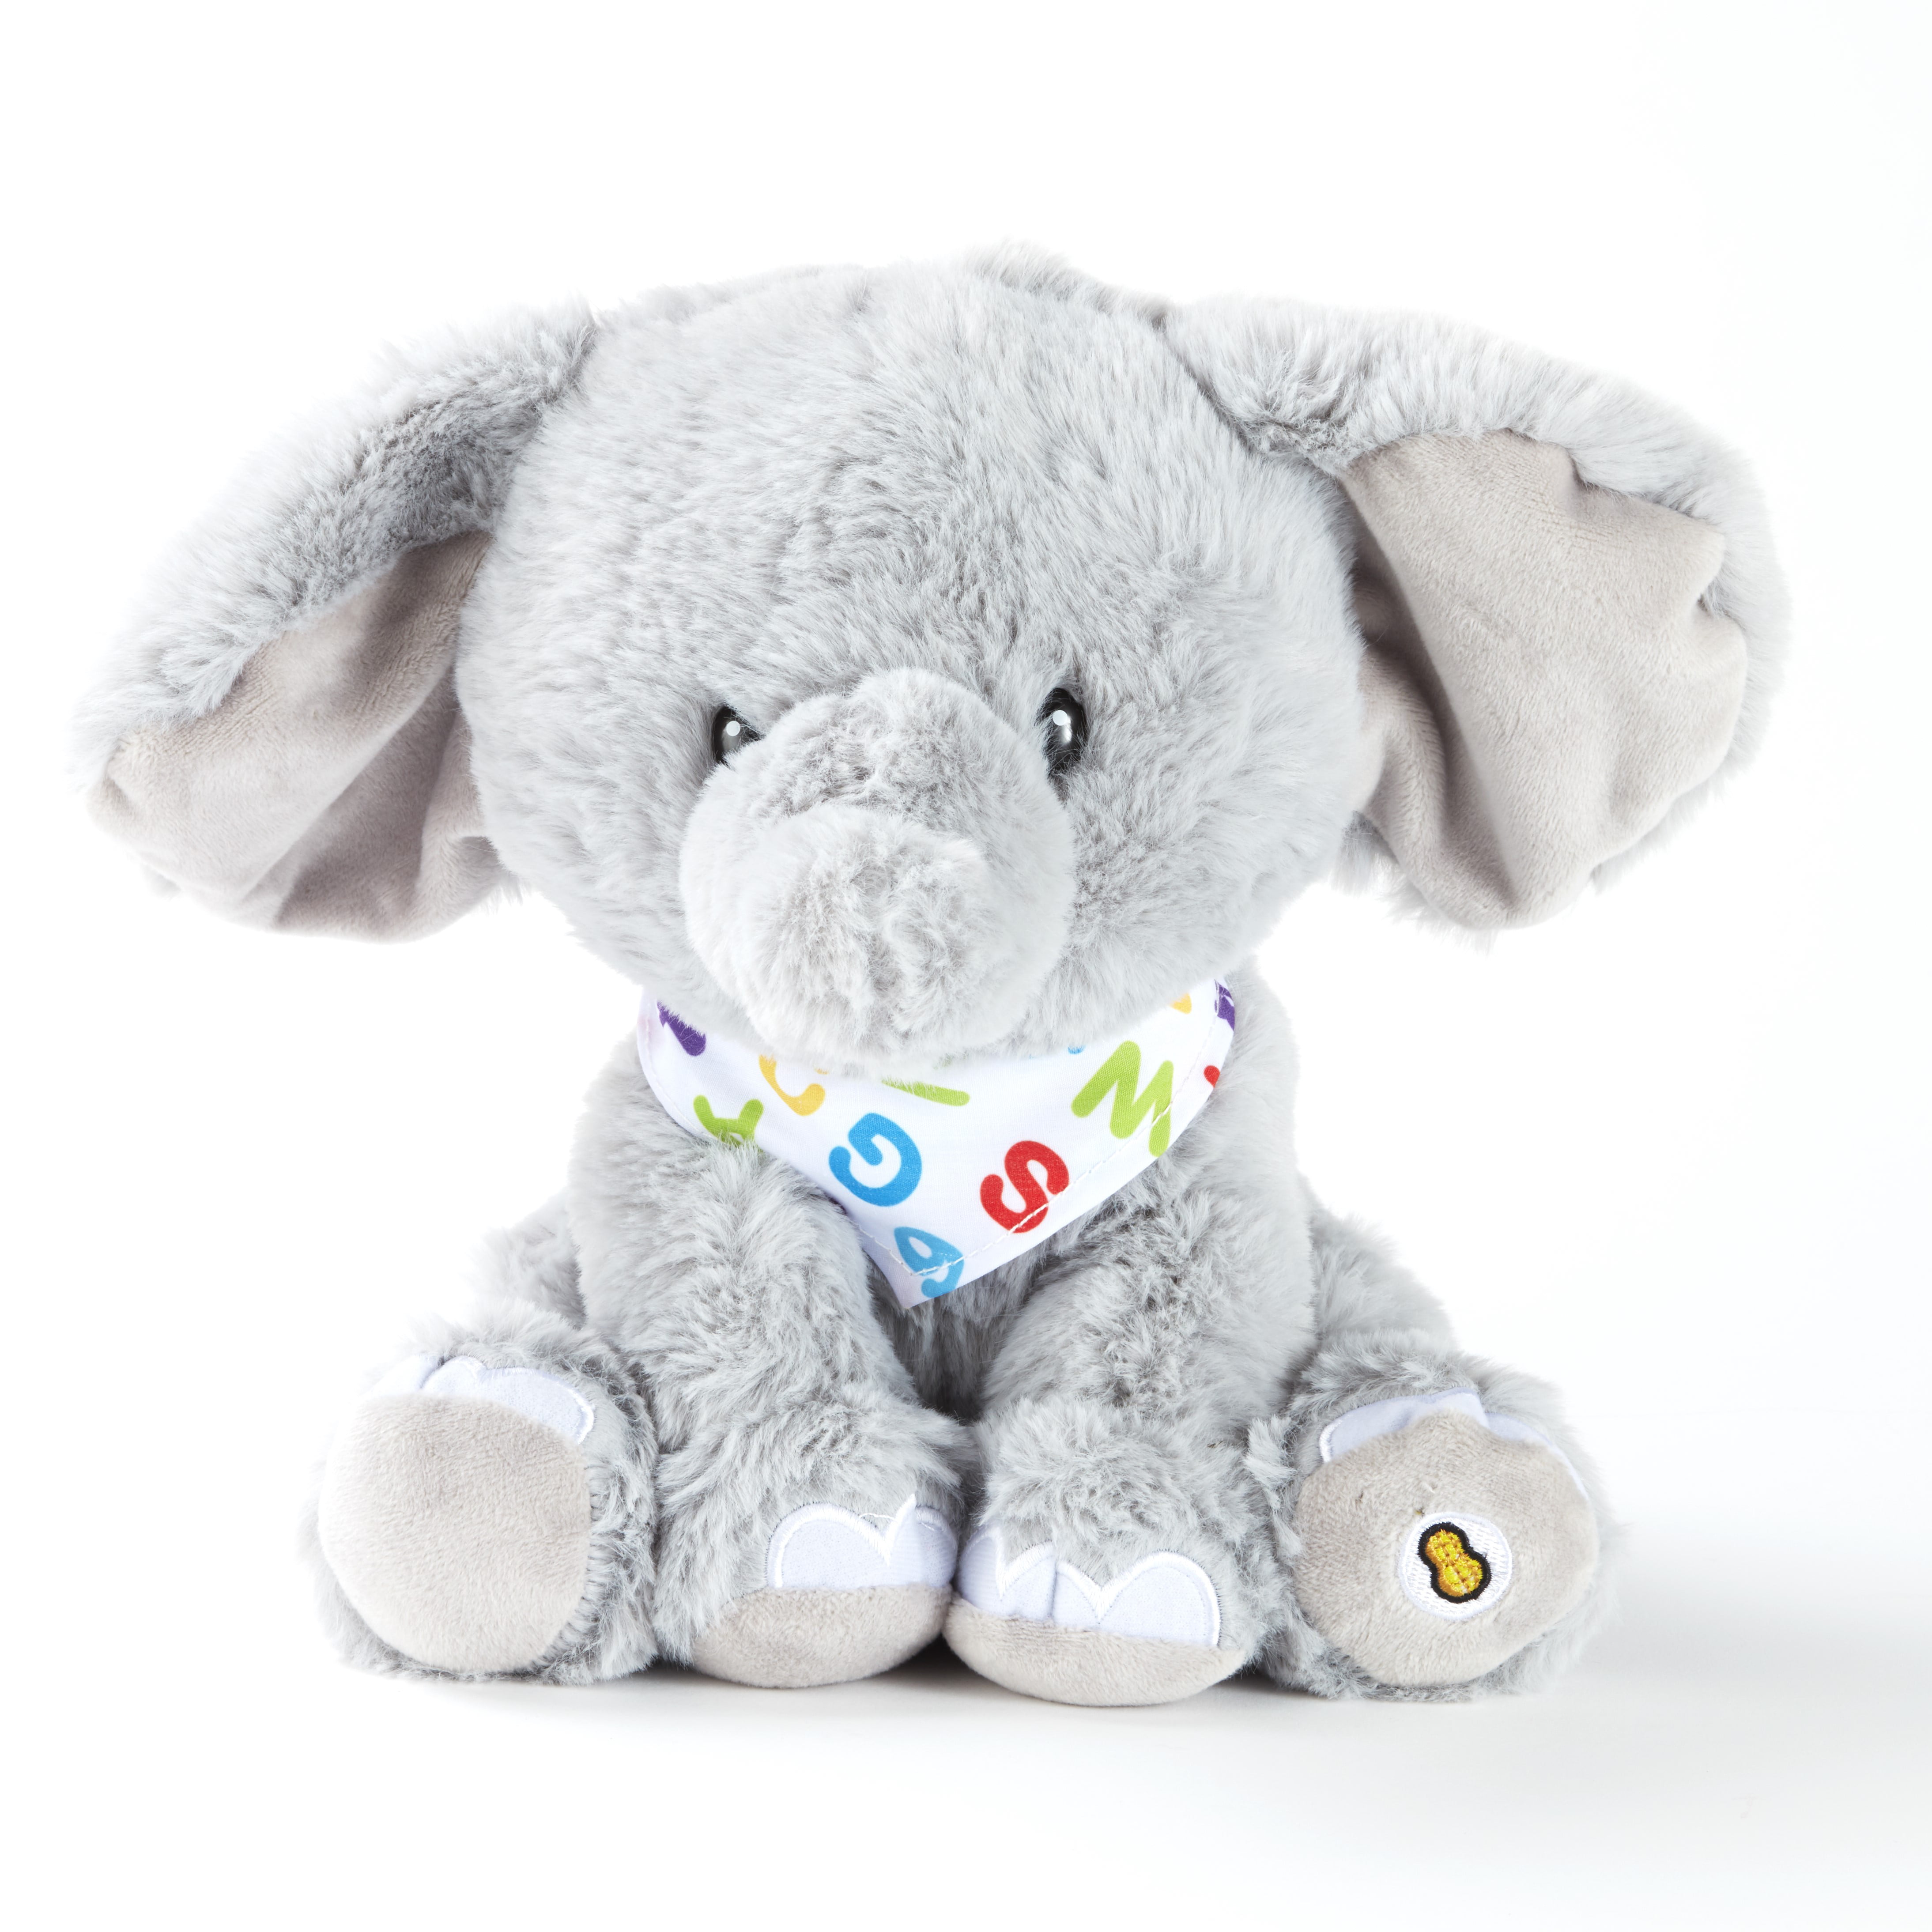 cuddle barn - alphabet elroy | animated singing elephant stuffed animal  plush toy wiggles ears to abc song and ten little elephants, 12 inches -  